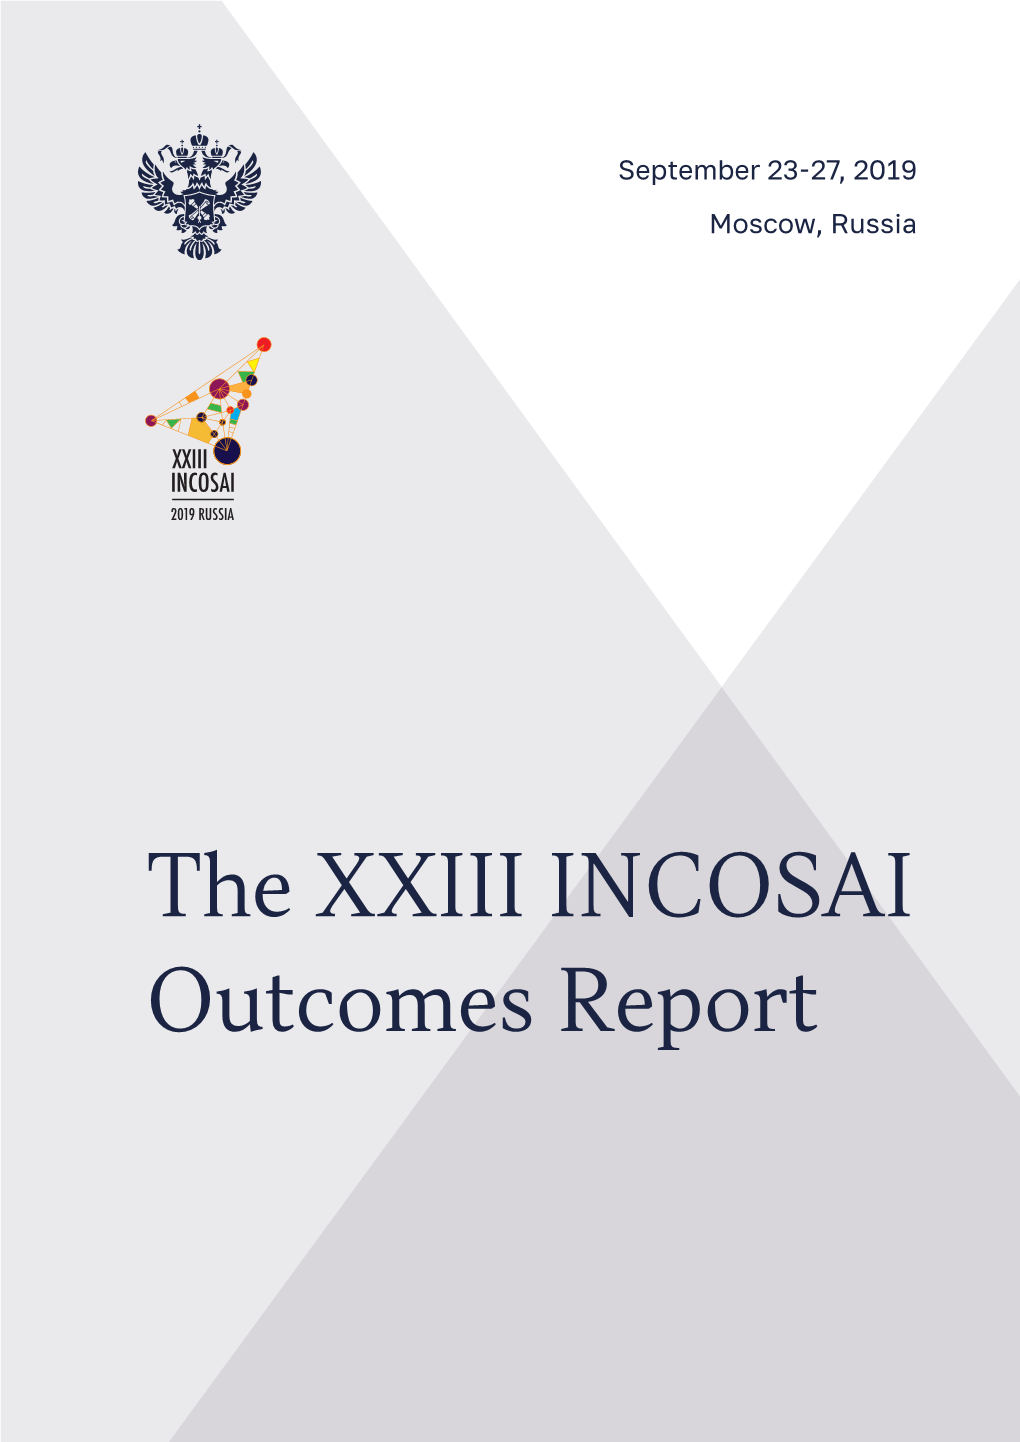 The XXIII INCOSAI Outcomes Report Table of Contents